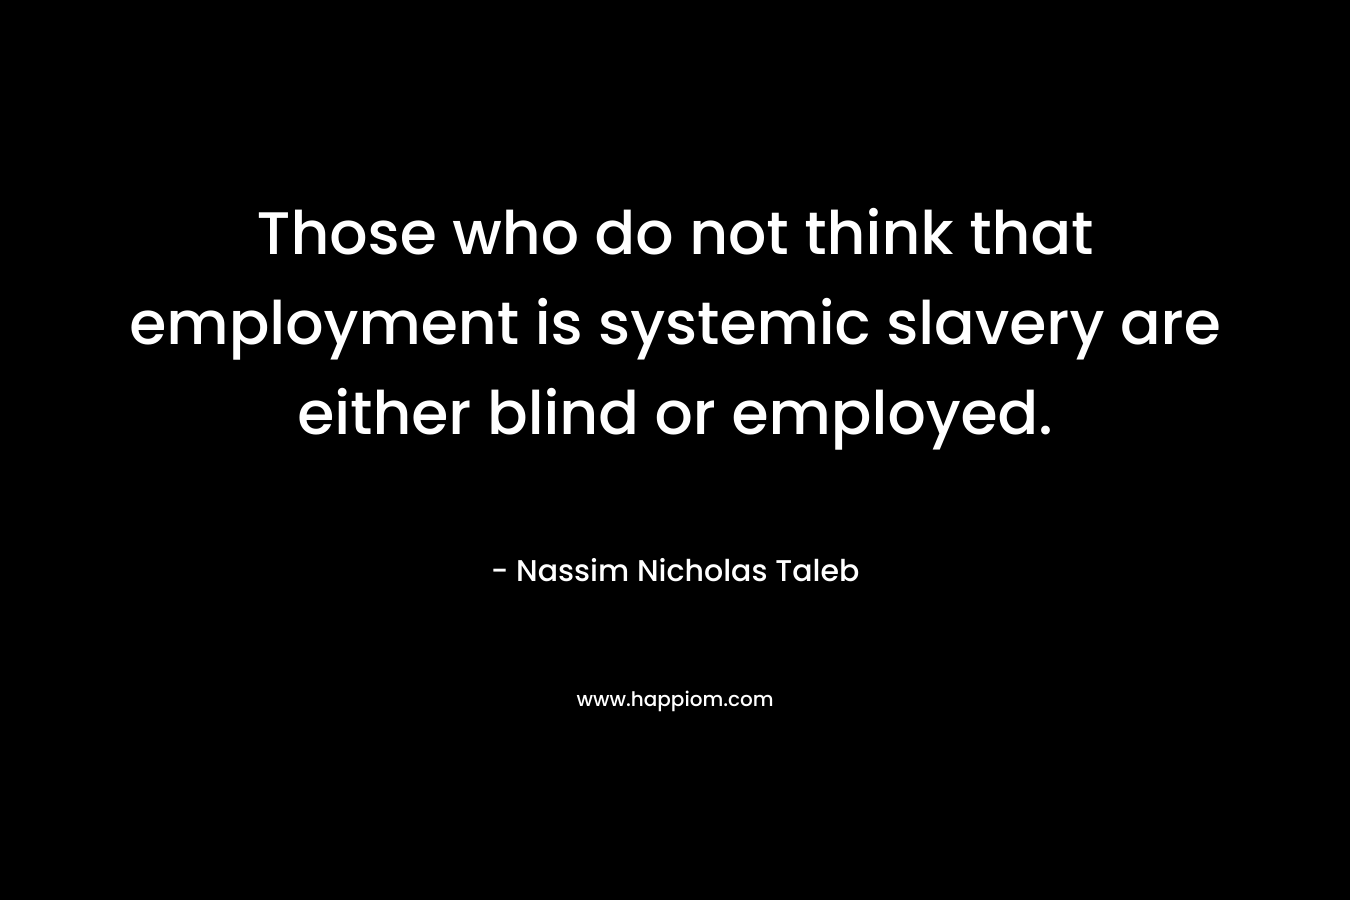 Those who do not think that employment is systemic slavery are either blind or employed. – Nassim Nicholas Taleb